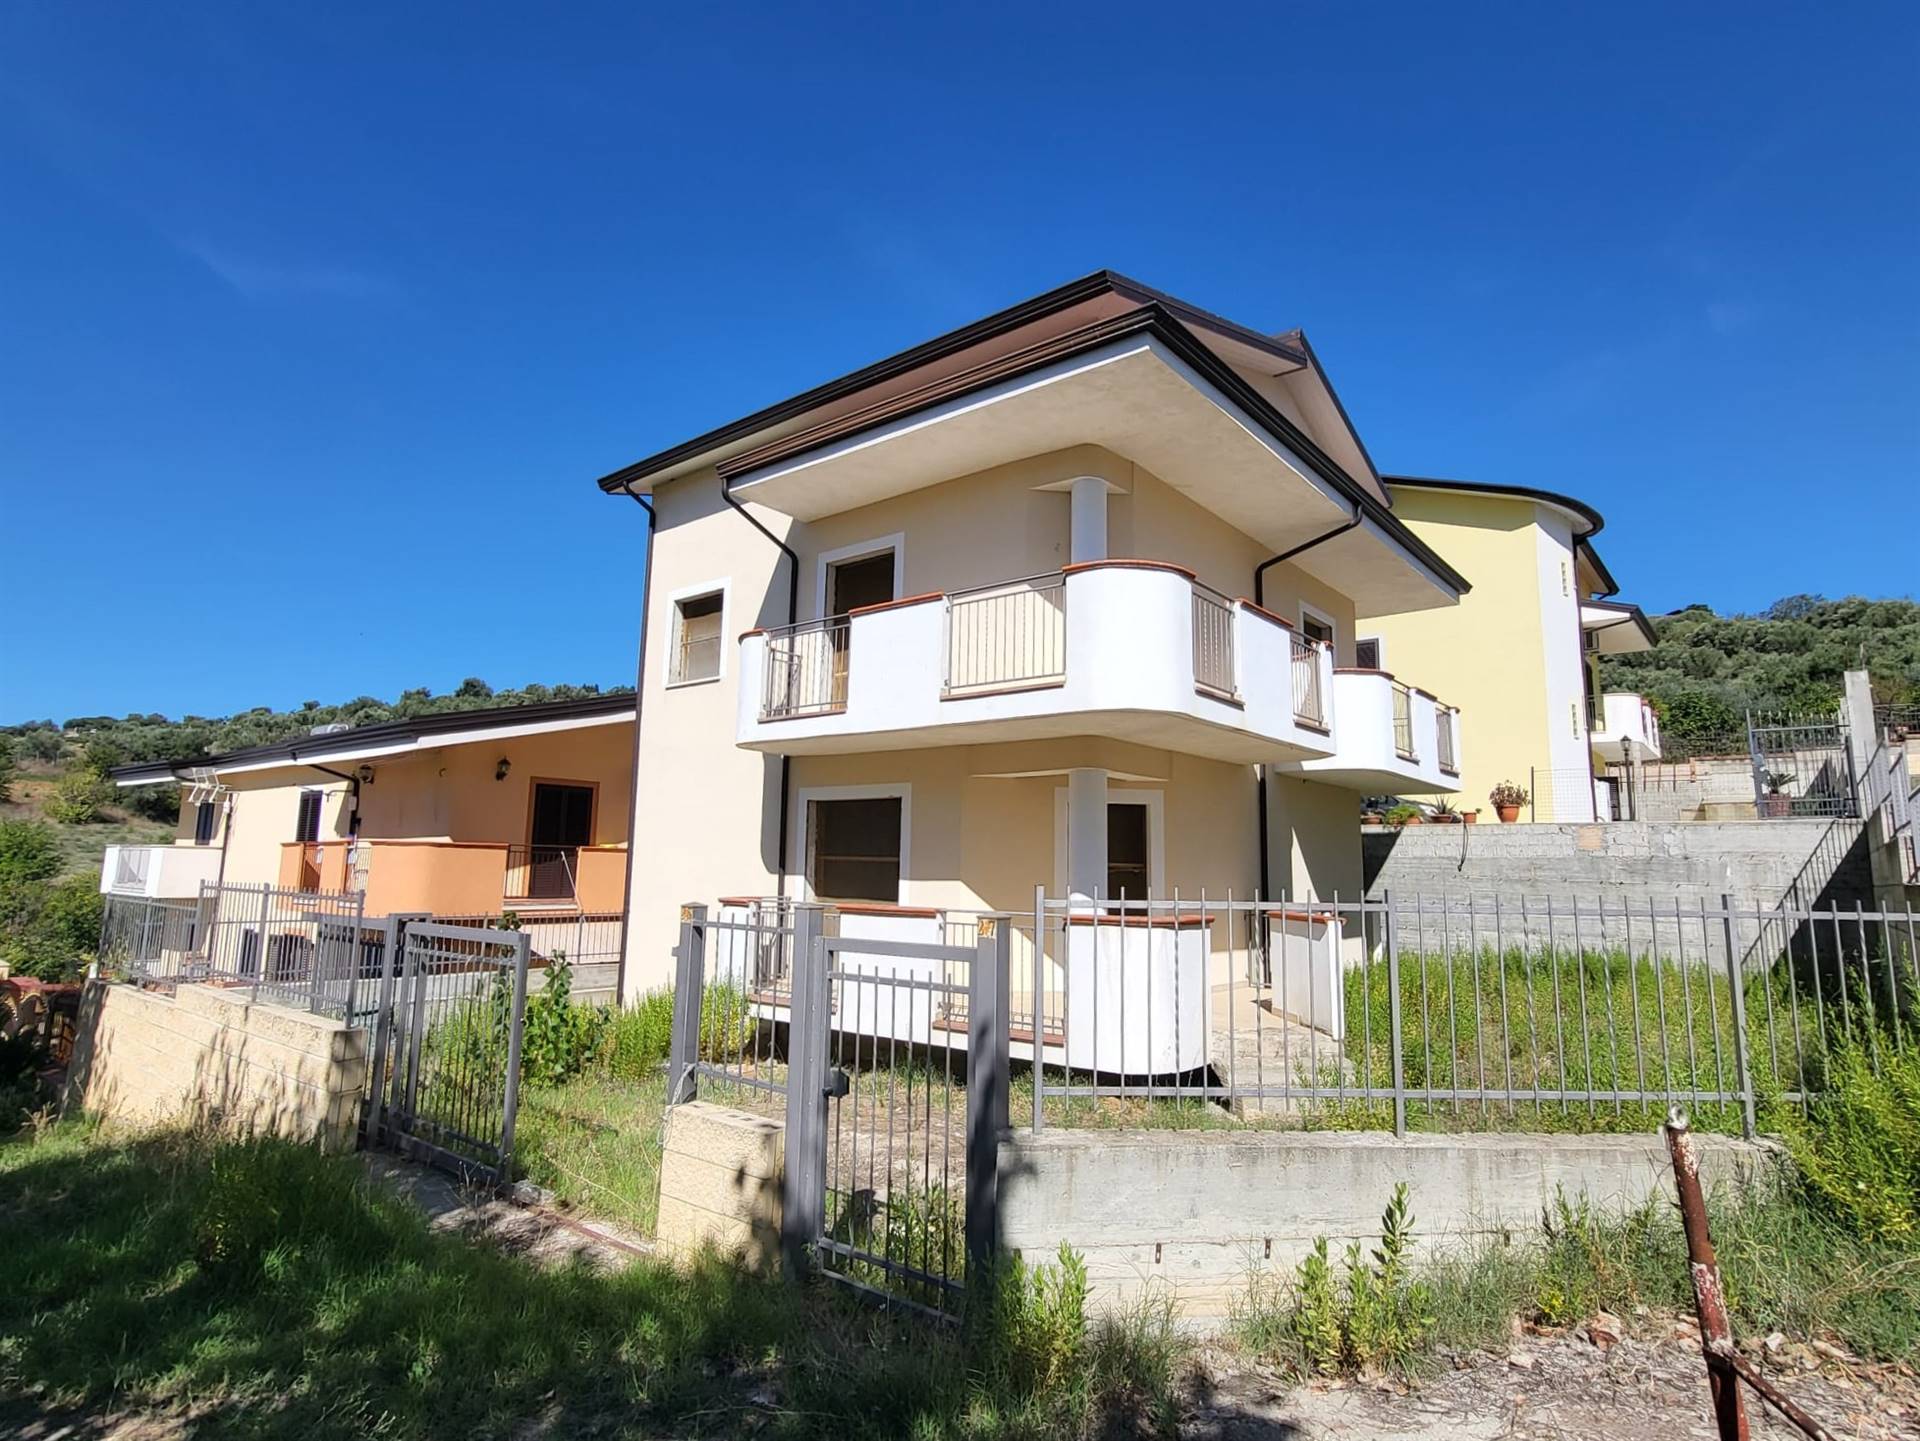 STAZIONE DI MONTALTO, MONTALTO UFFUGO, Villa for sale of 130 Sq. mt., New construction, Heating Individual heating system, placed at Ground on 2, 